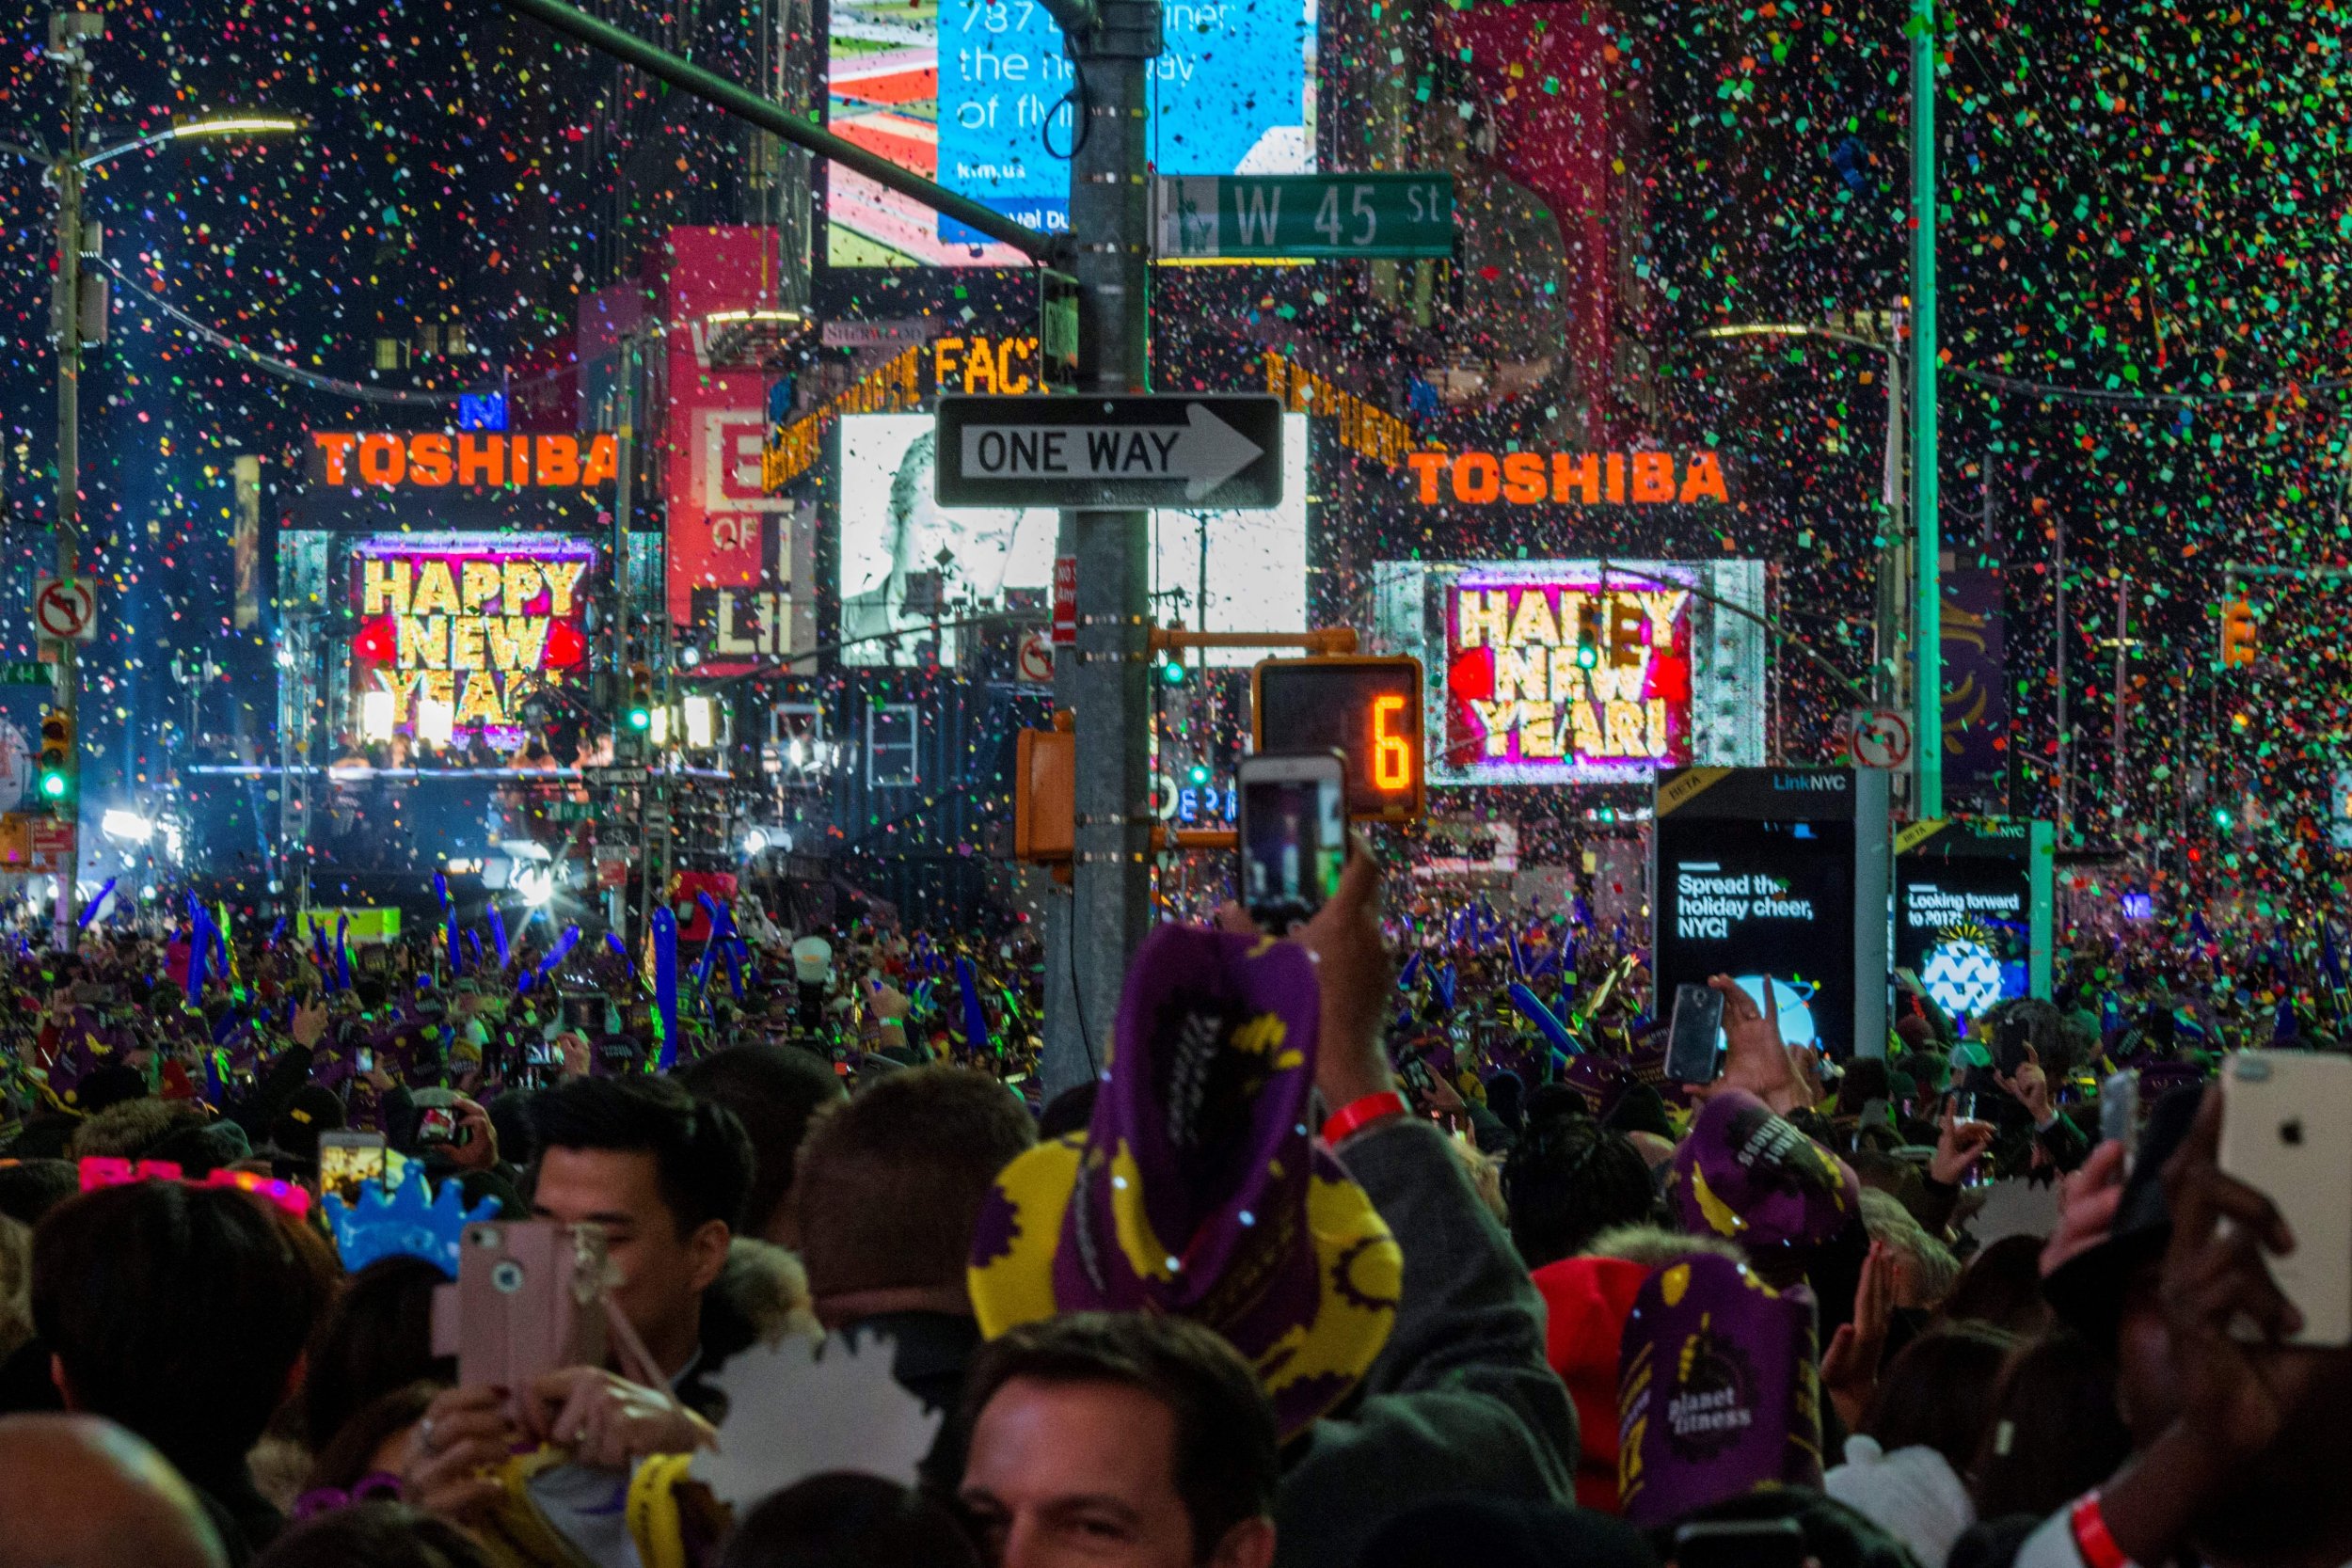 New year's eve for netflix story